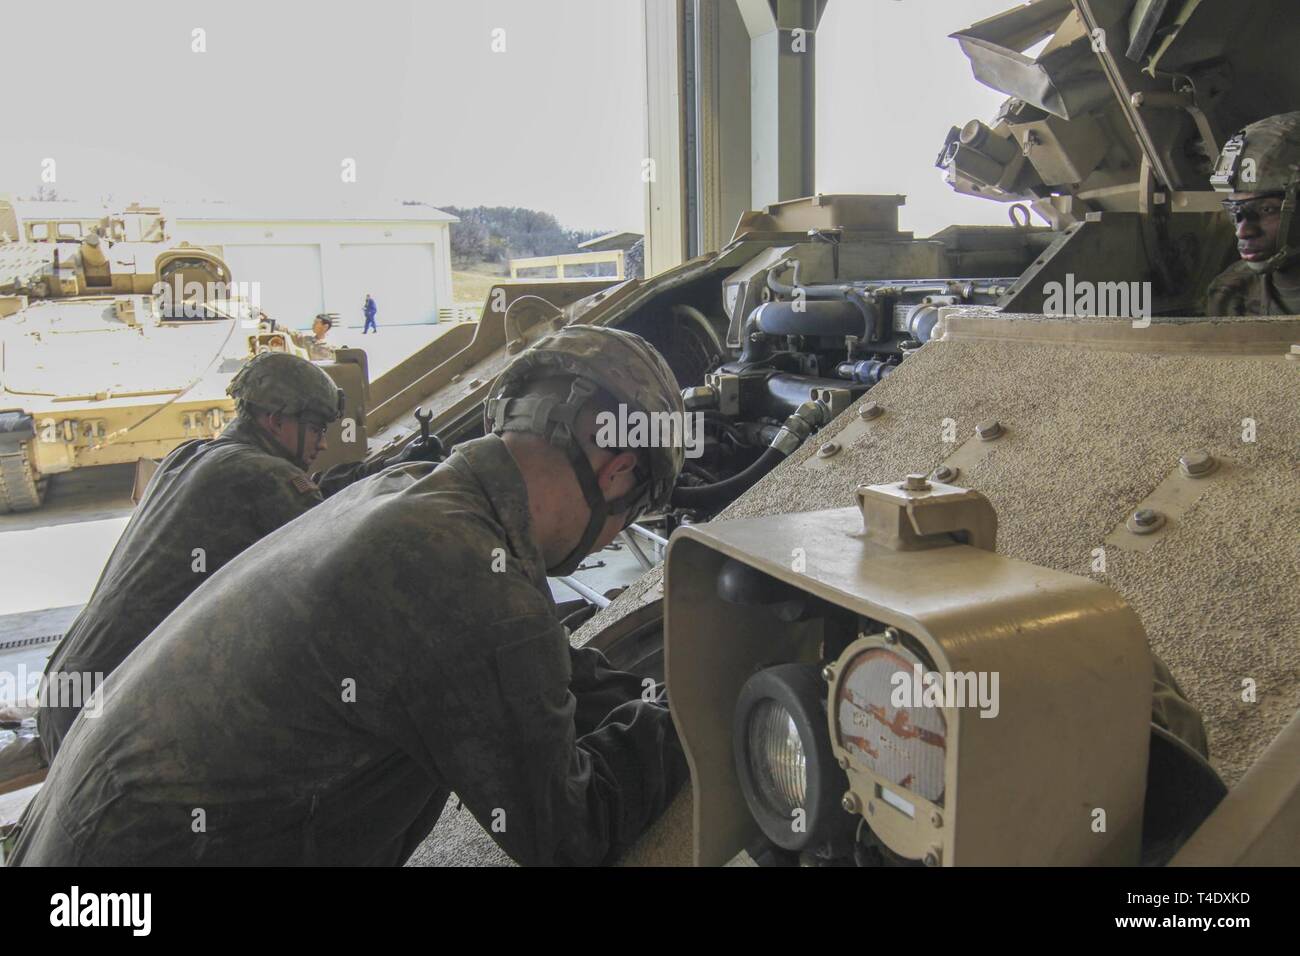 U.S. Army Soldiers assigned to 1st Battalion, 16th Infantry Regiment, 1st Armored Brigade Combat Team, 1st Infantry Division perfom vehicle services on an M2 Bradley Fighting Vehicle in the maintenance bay at Novo Selo Training Area, Bulgaria, March 26, 2019. The unit is deployed to Bulgaria in support of the Atlantic Resolve Mission. Stock Photo